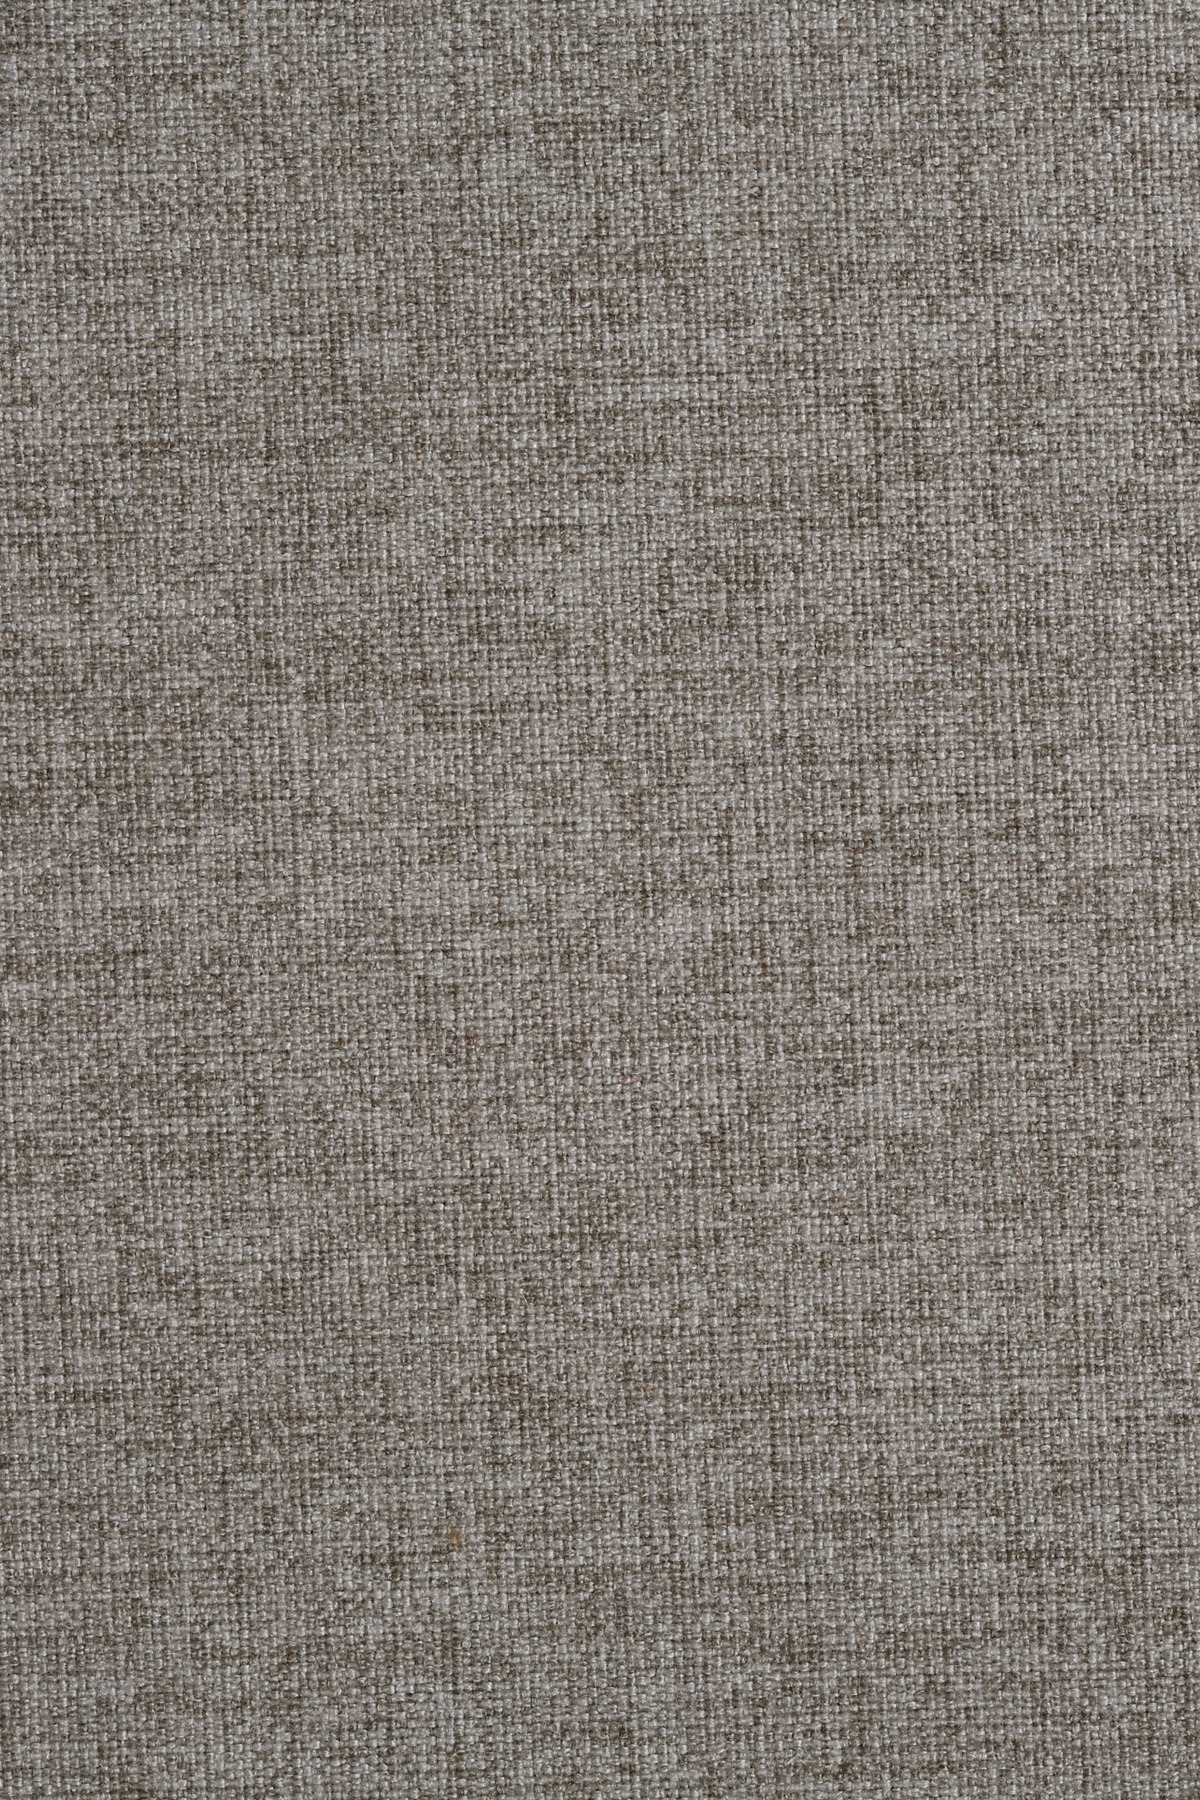 Dapper Dove - Grey Leather Upholstery Fabric - www.